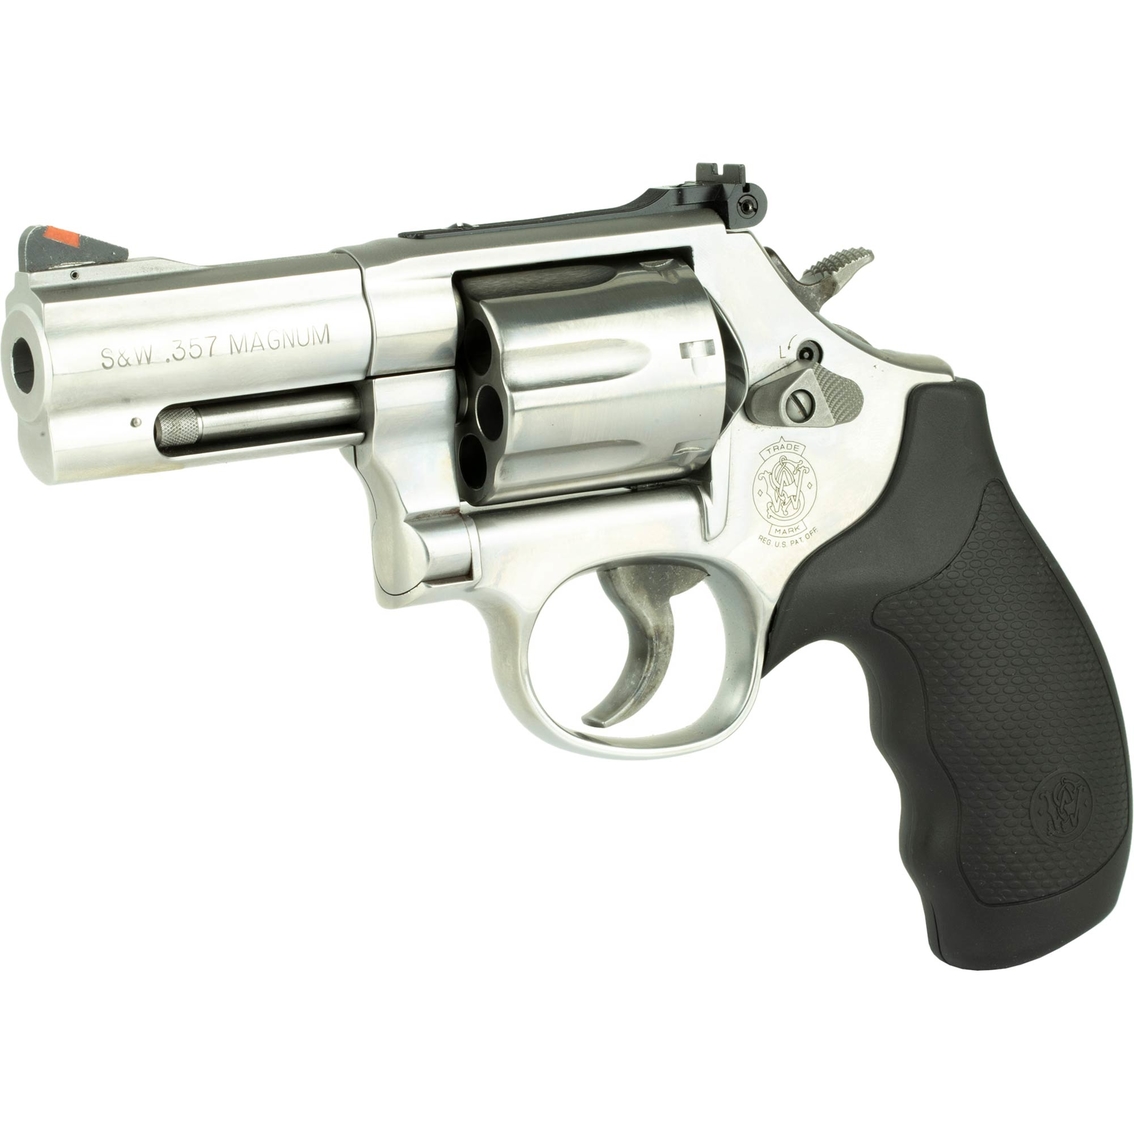 S&W 686 Plus 357 Mag 3 in. Barrel 7 Rnd Revolver Stainless Steel - Image 3 of 3